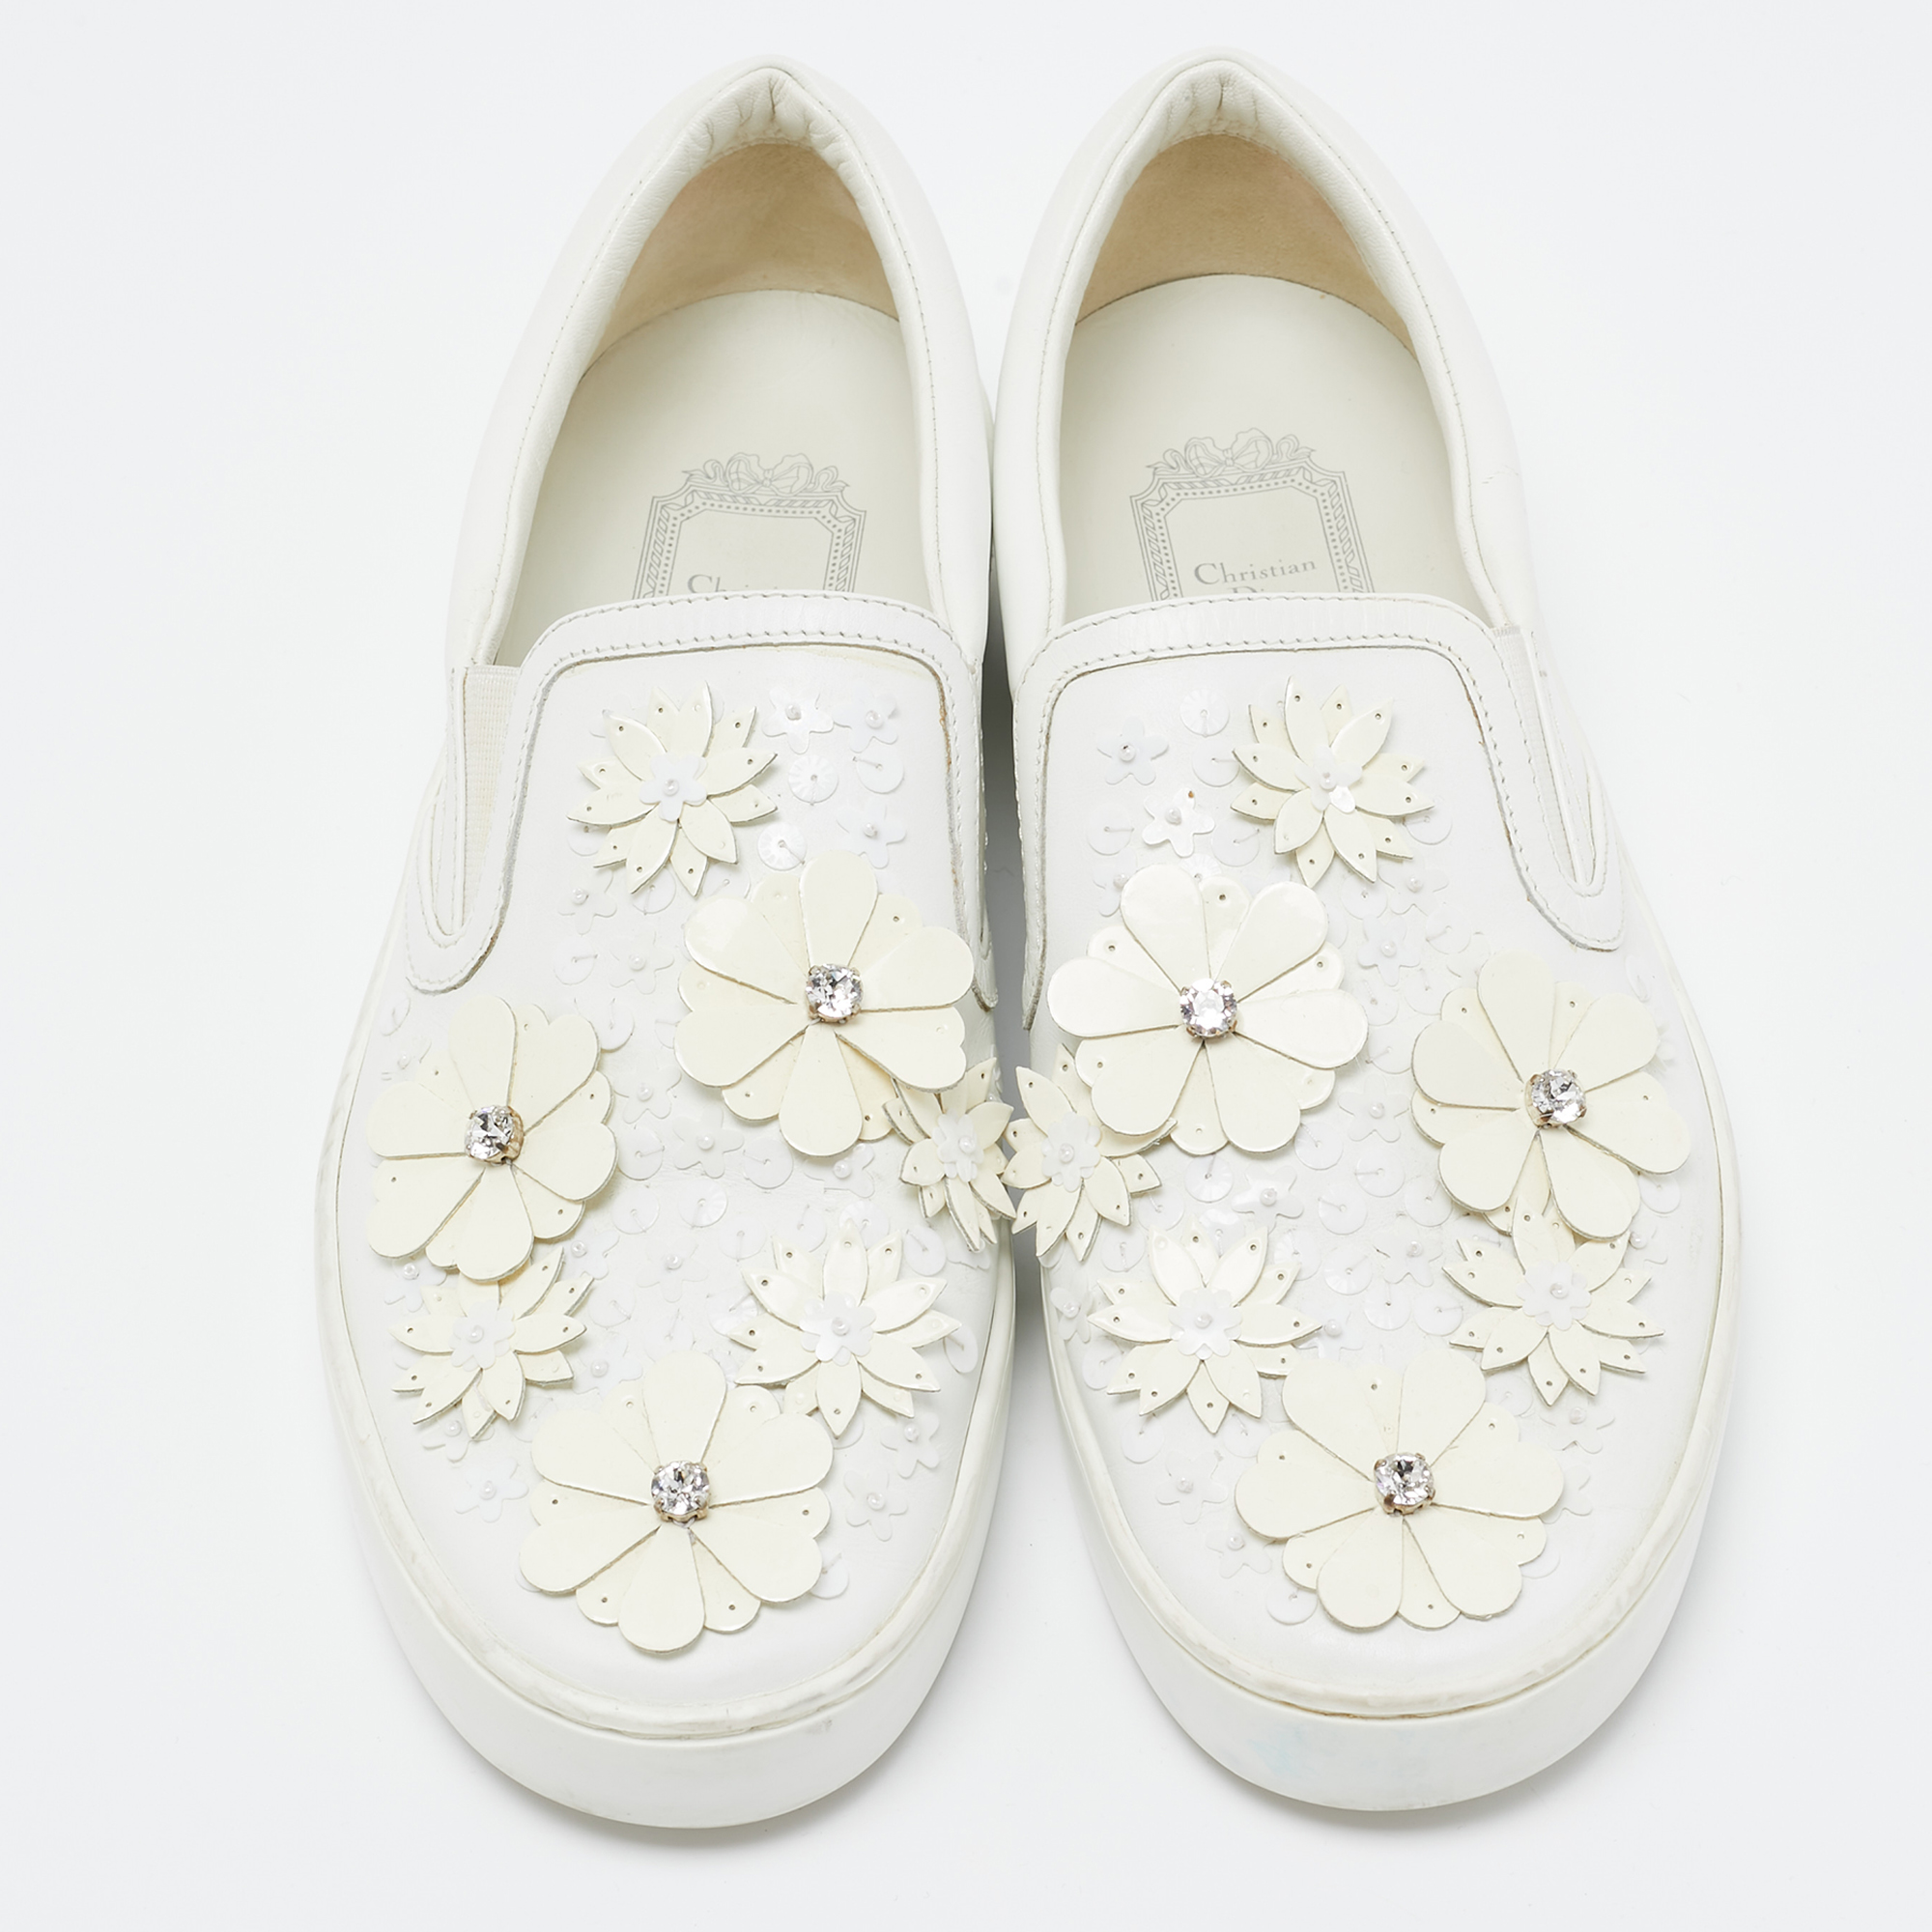 Dior White Leather Daisy Flower Embellished Slip On Sneakers Size 37.5